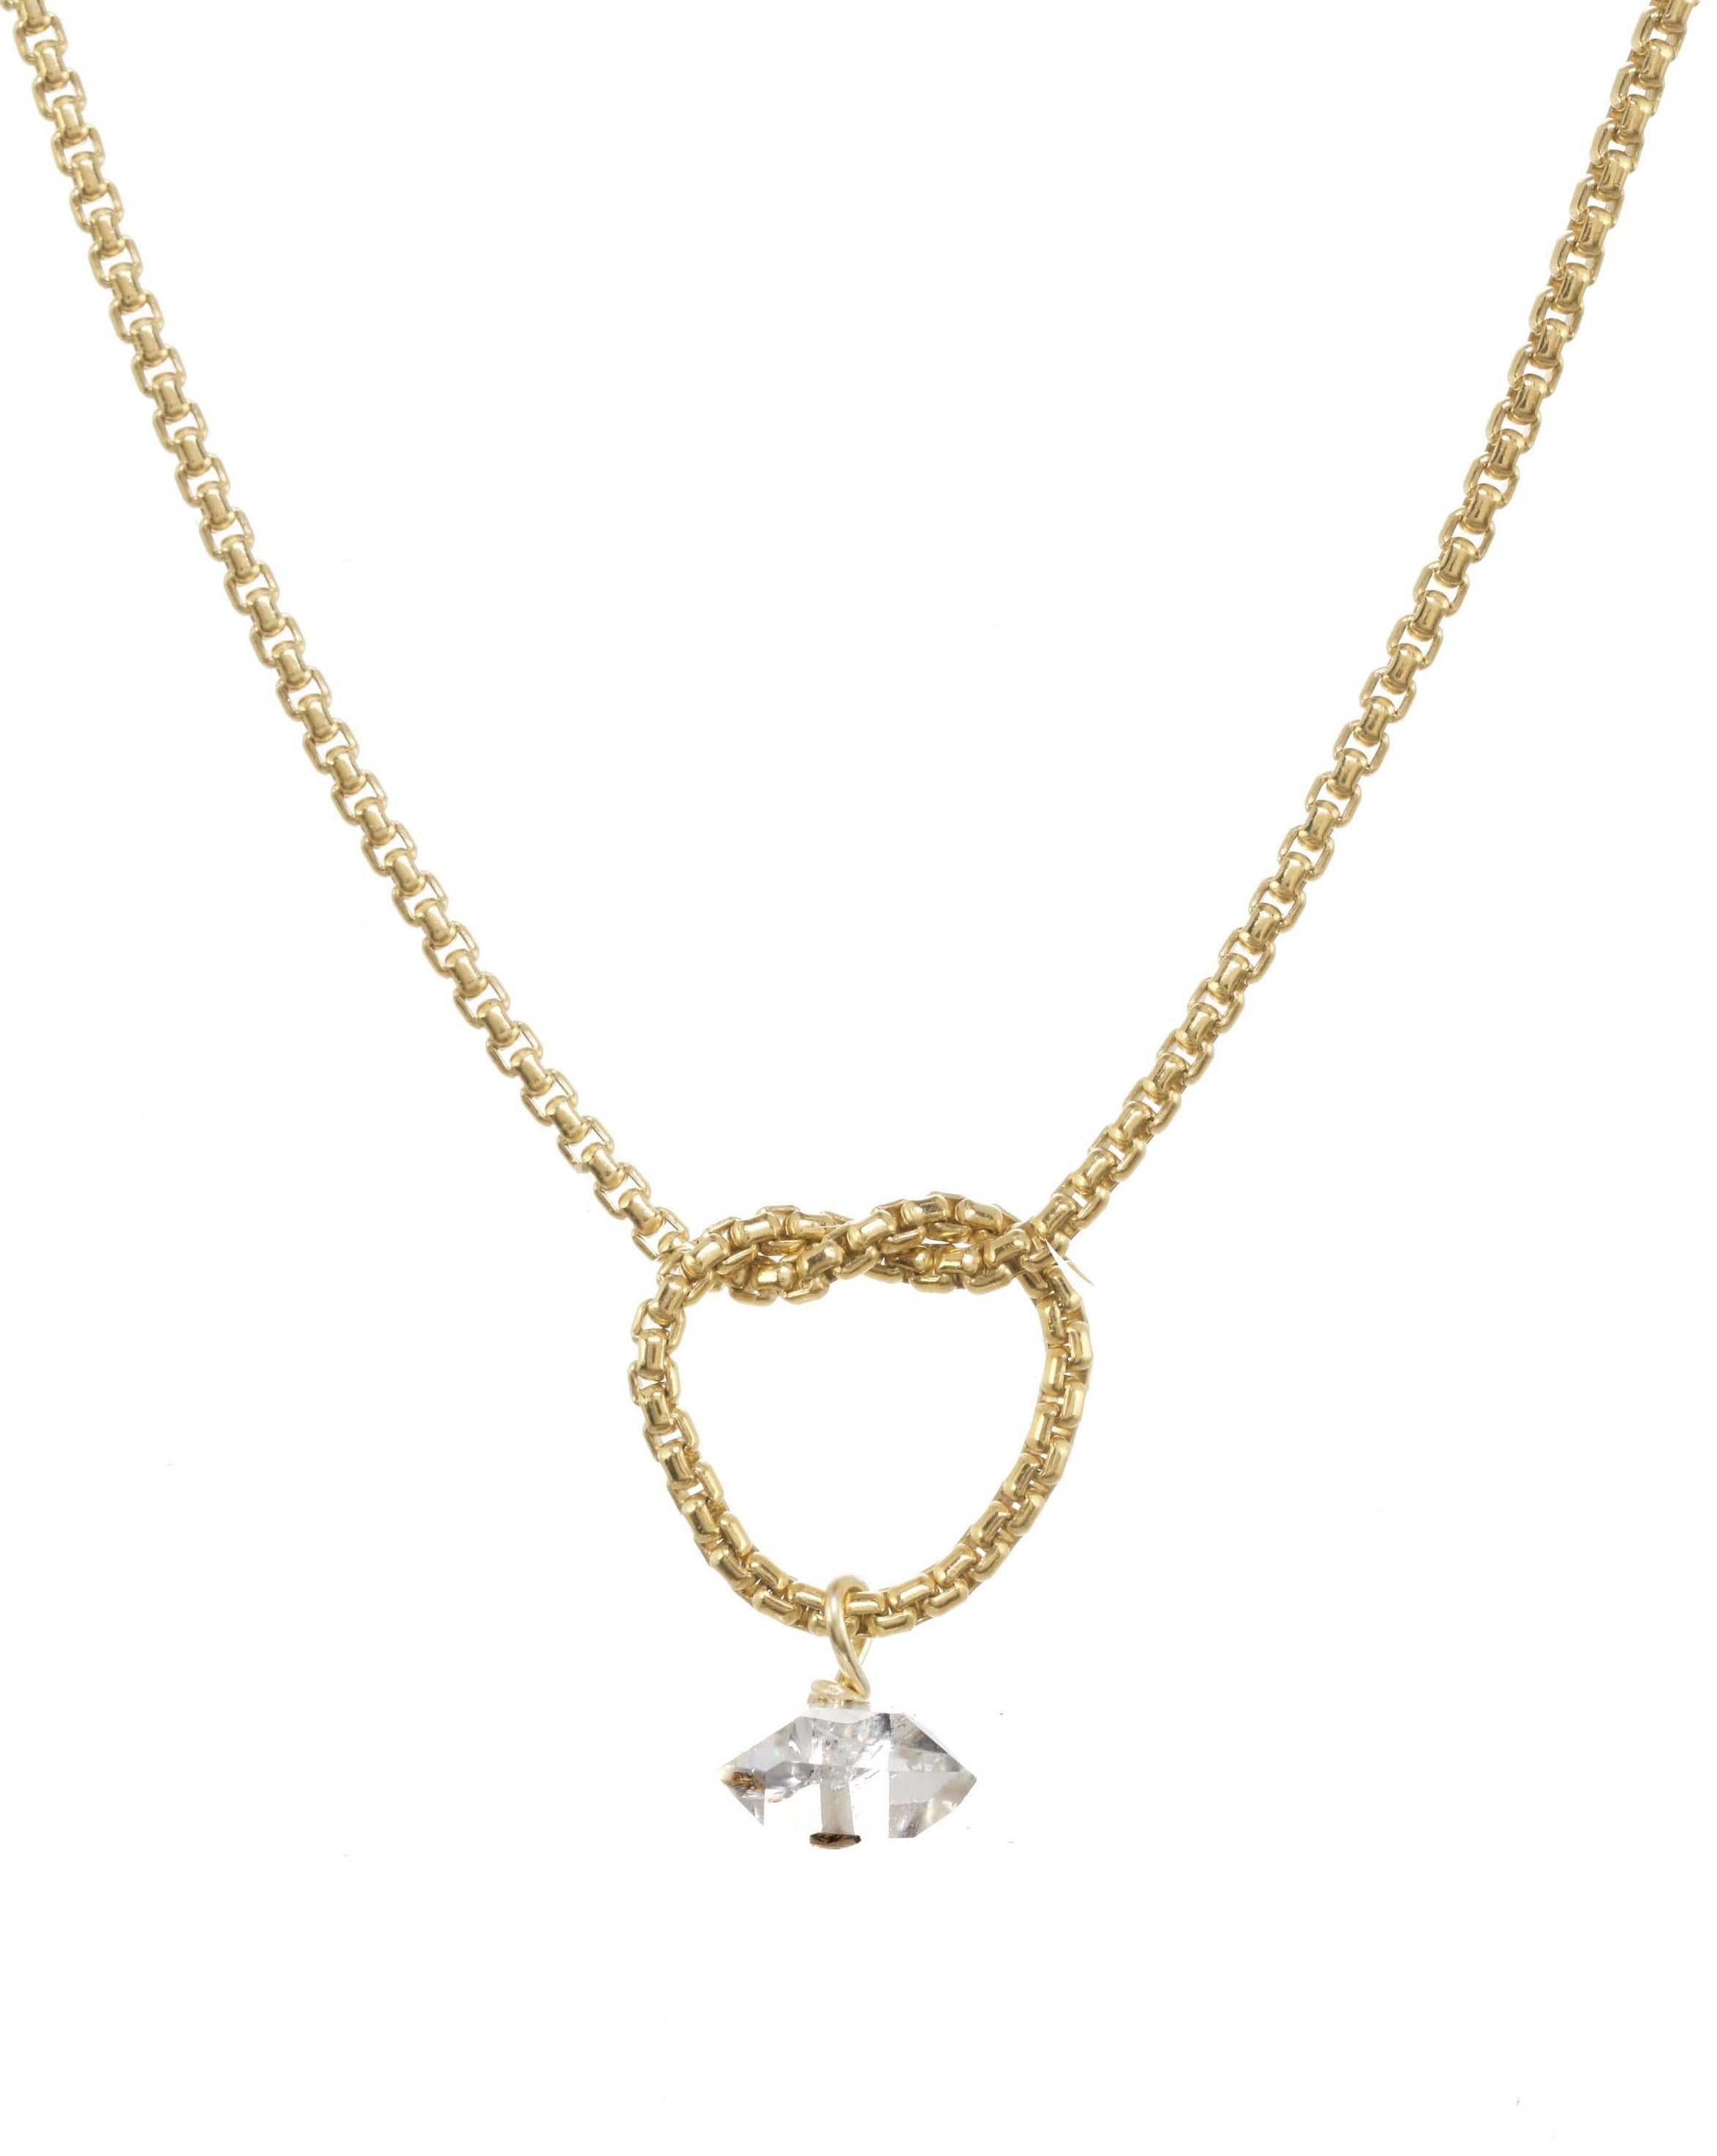 Love Knot Necklace – Belesmé - Memorable Jewelry Gifts